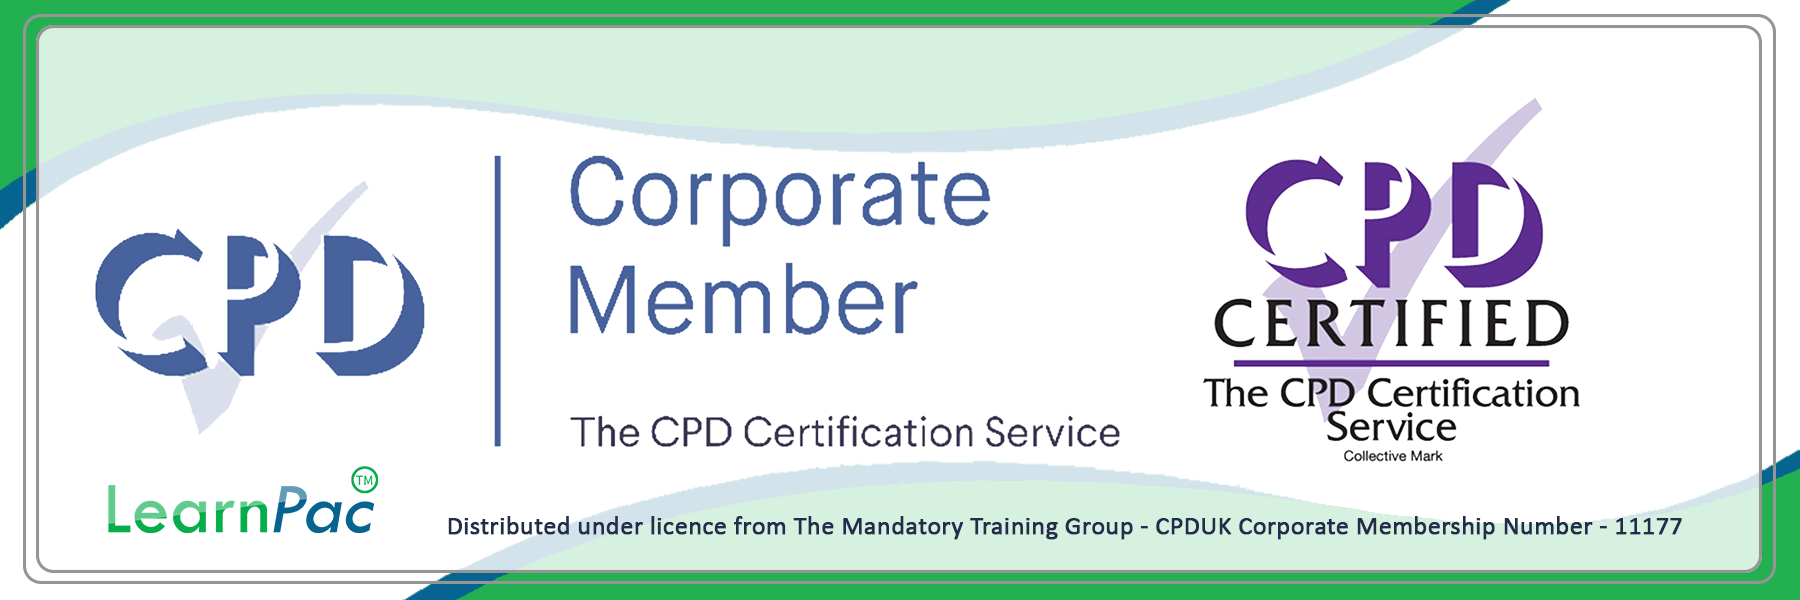 Care Quality Commission - E-Learning Courses with Certificates - CPD Certified - LearnPac Systems UK -